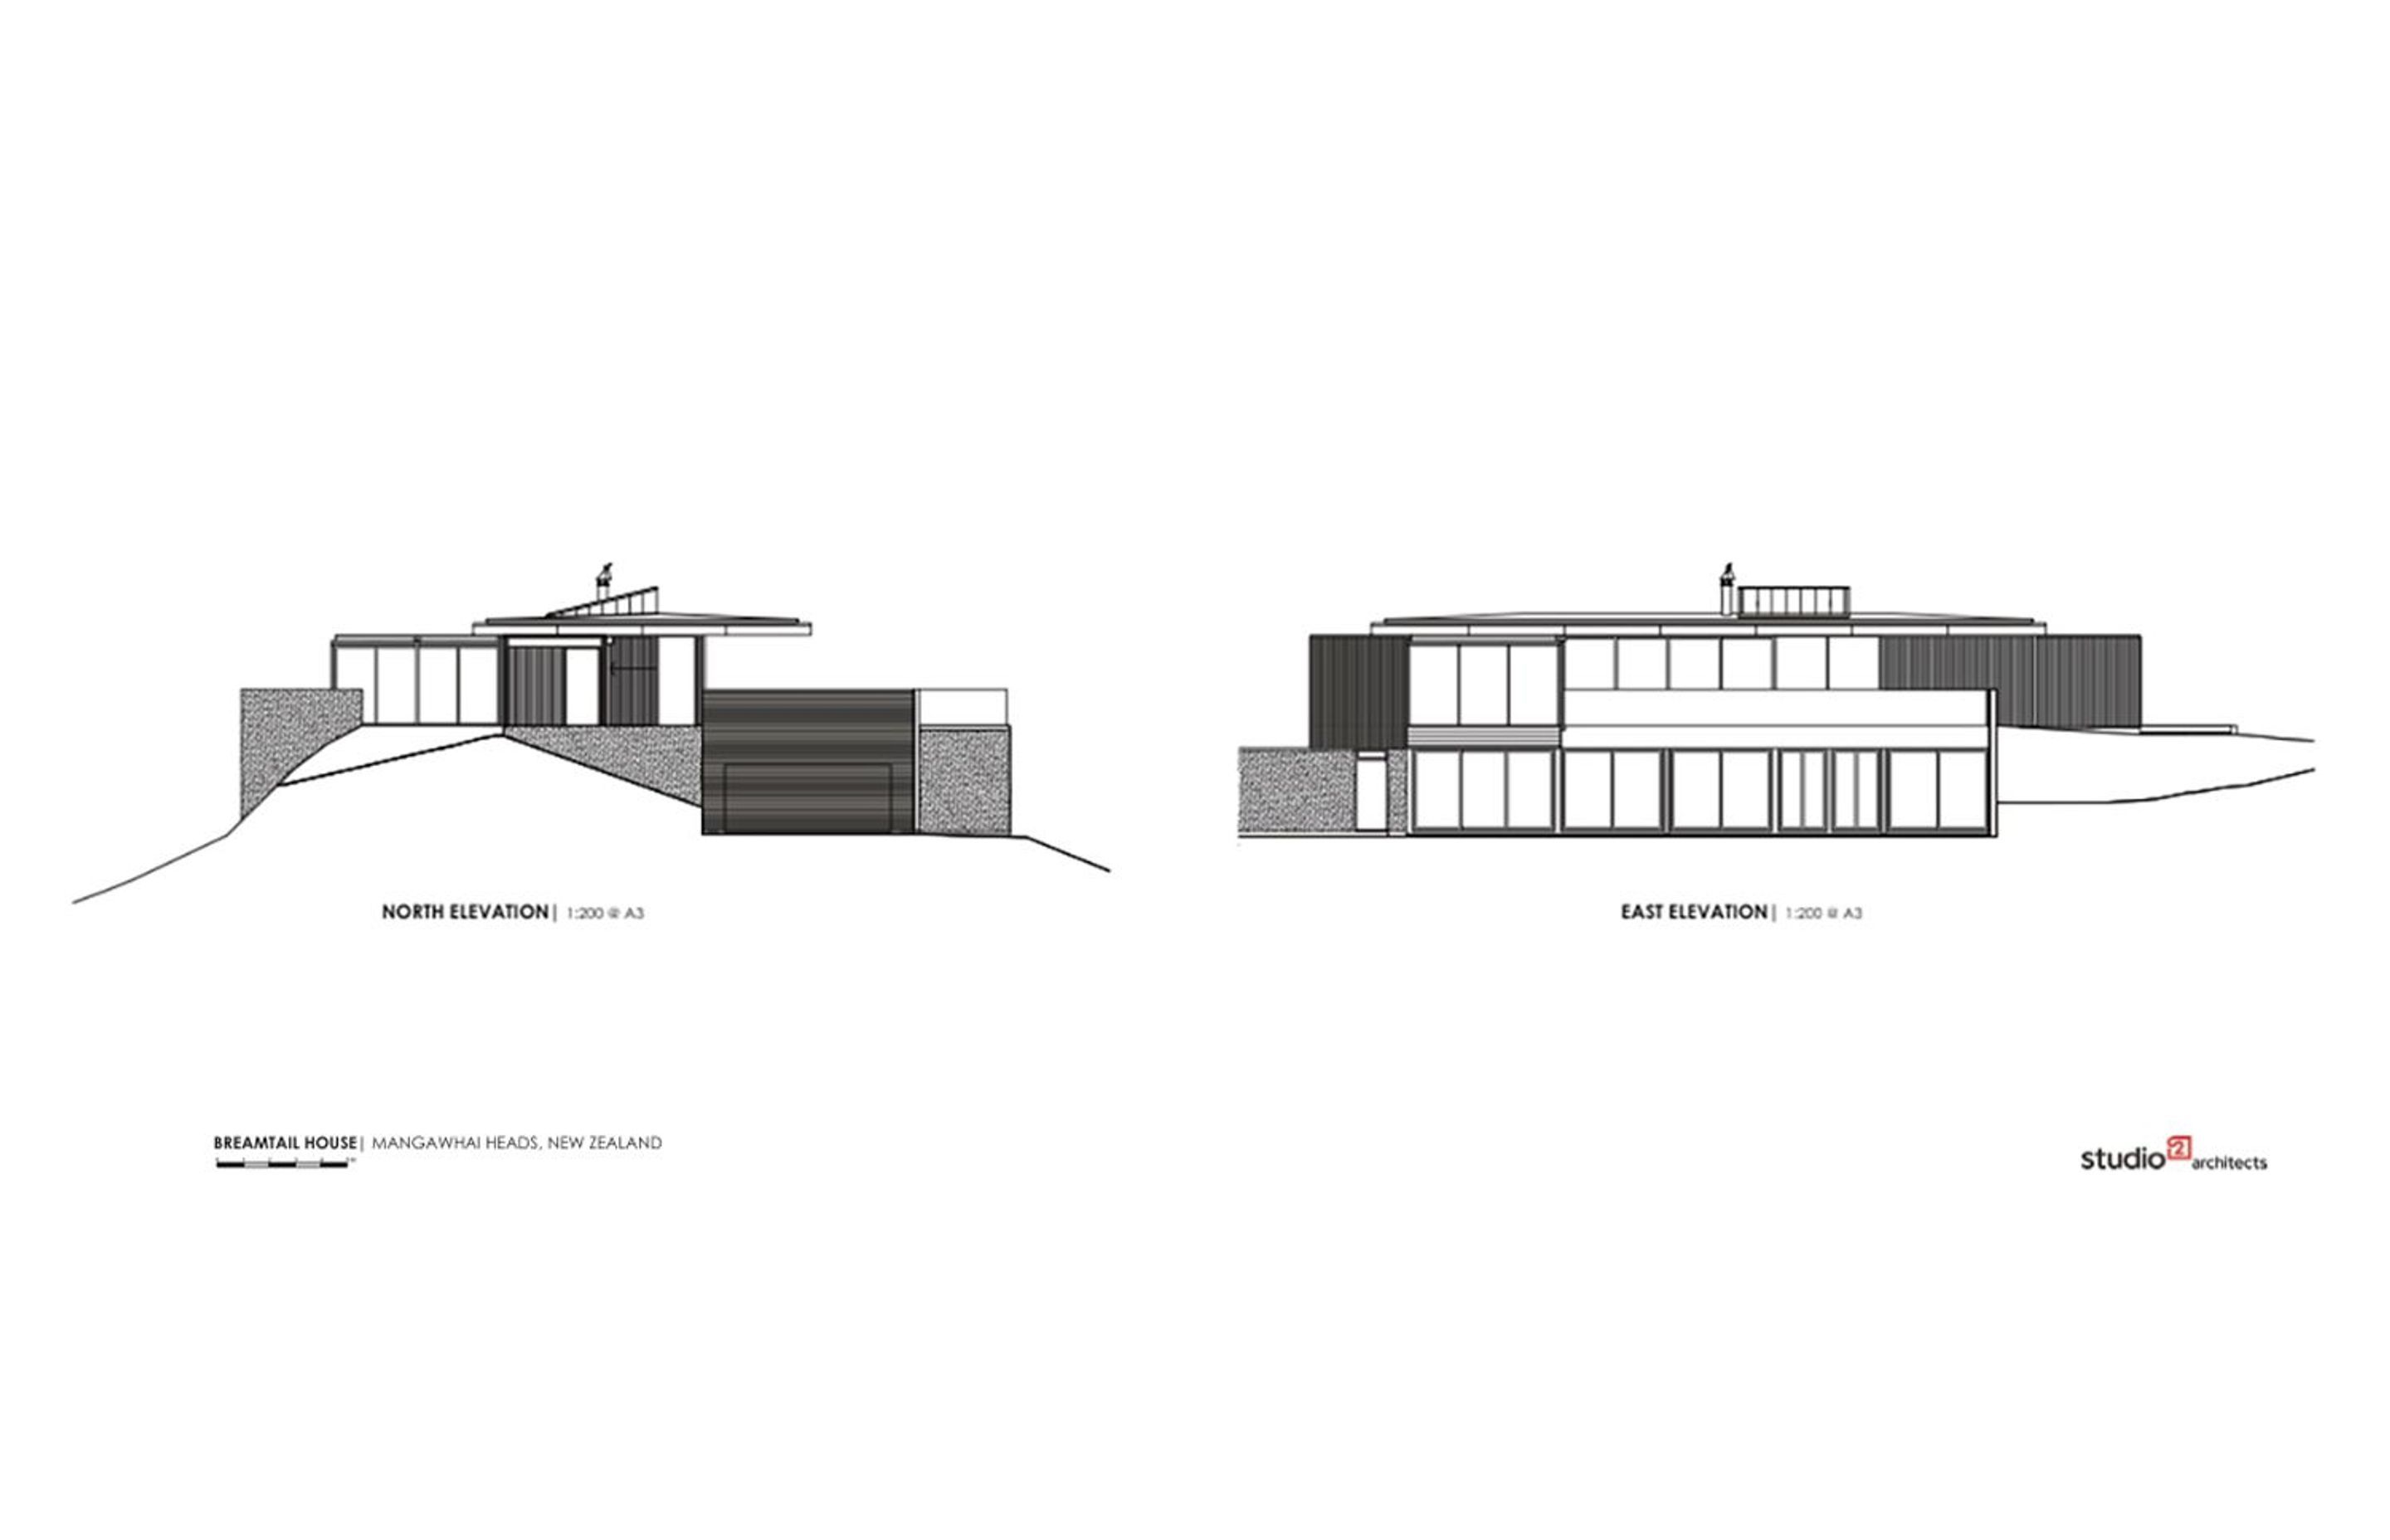 Breamtail House north and east elevations by Studio2 Architects.